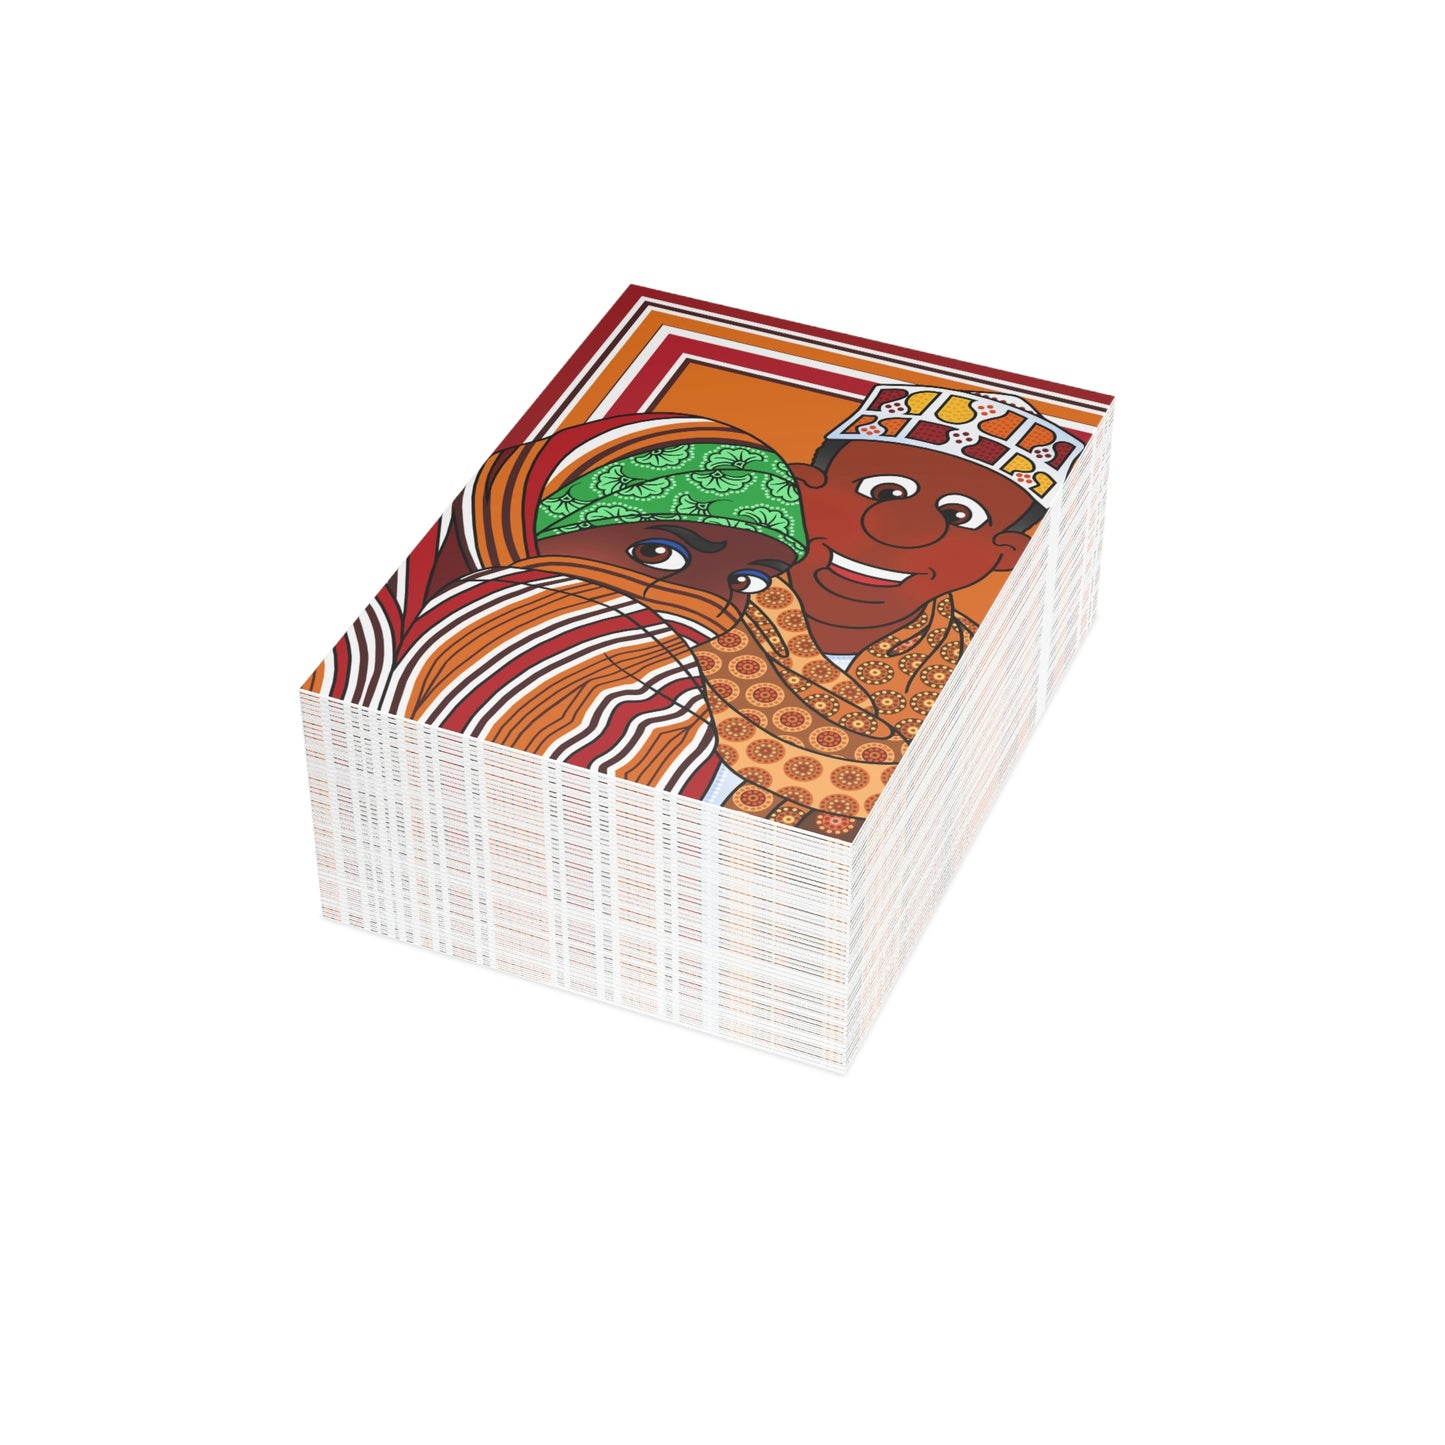 The Kitty Cat Cried Greeting Cards (1, 10, 30, and 50pcs)